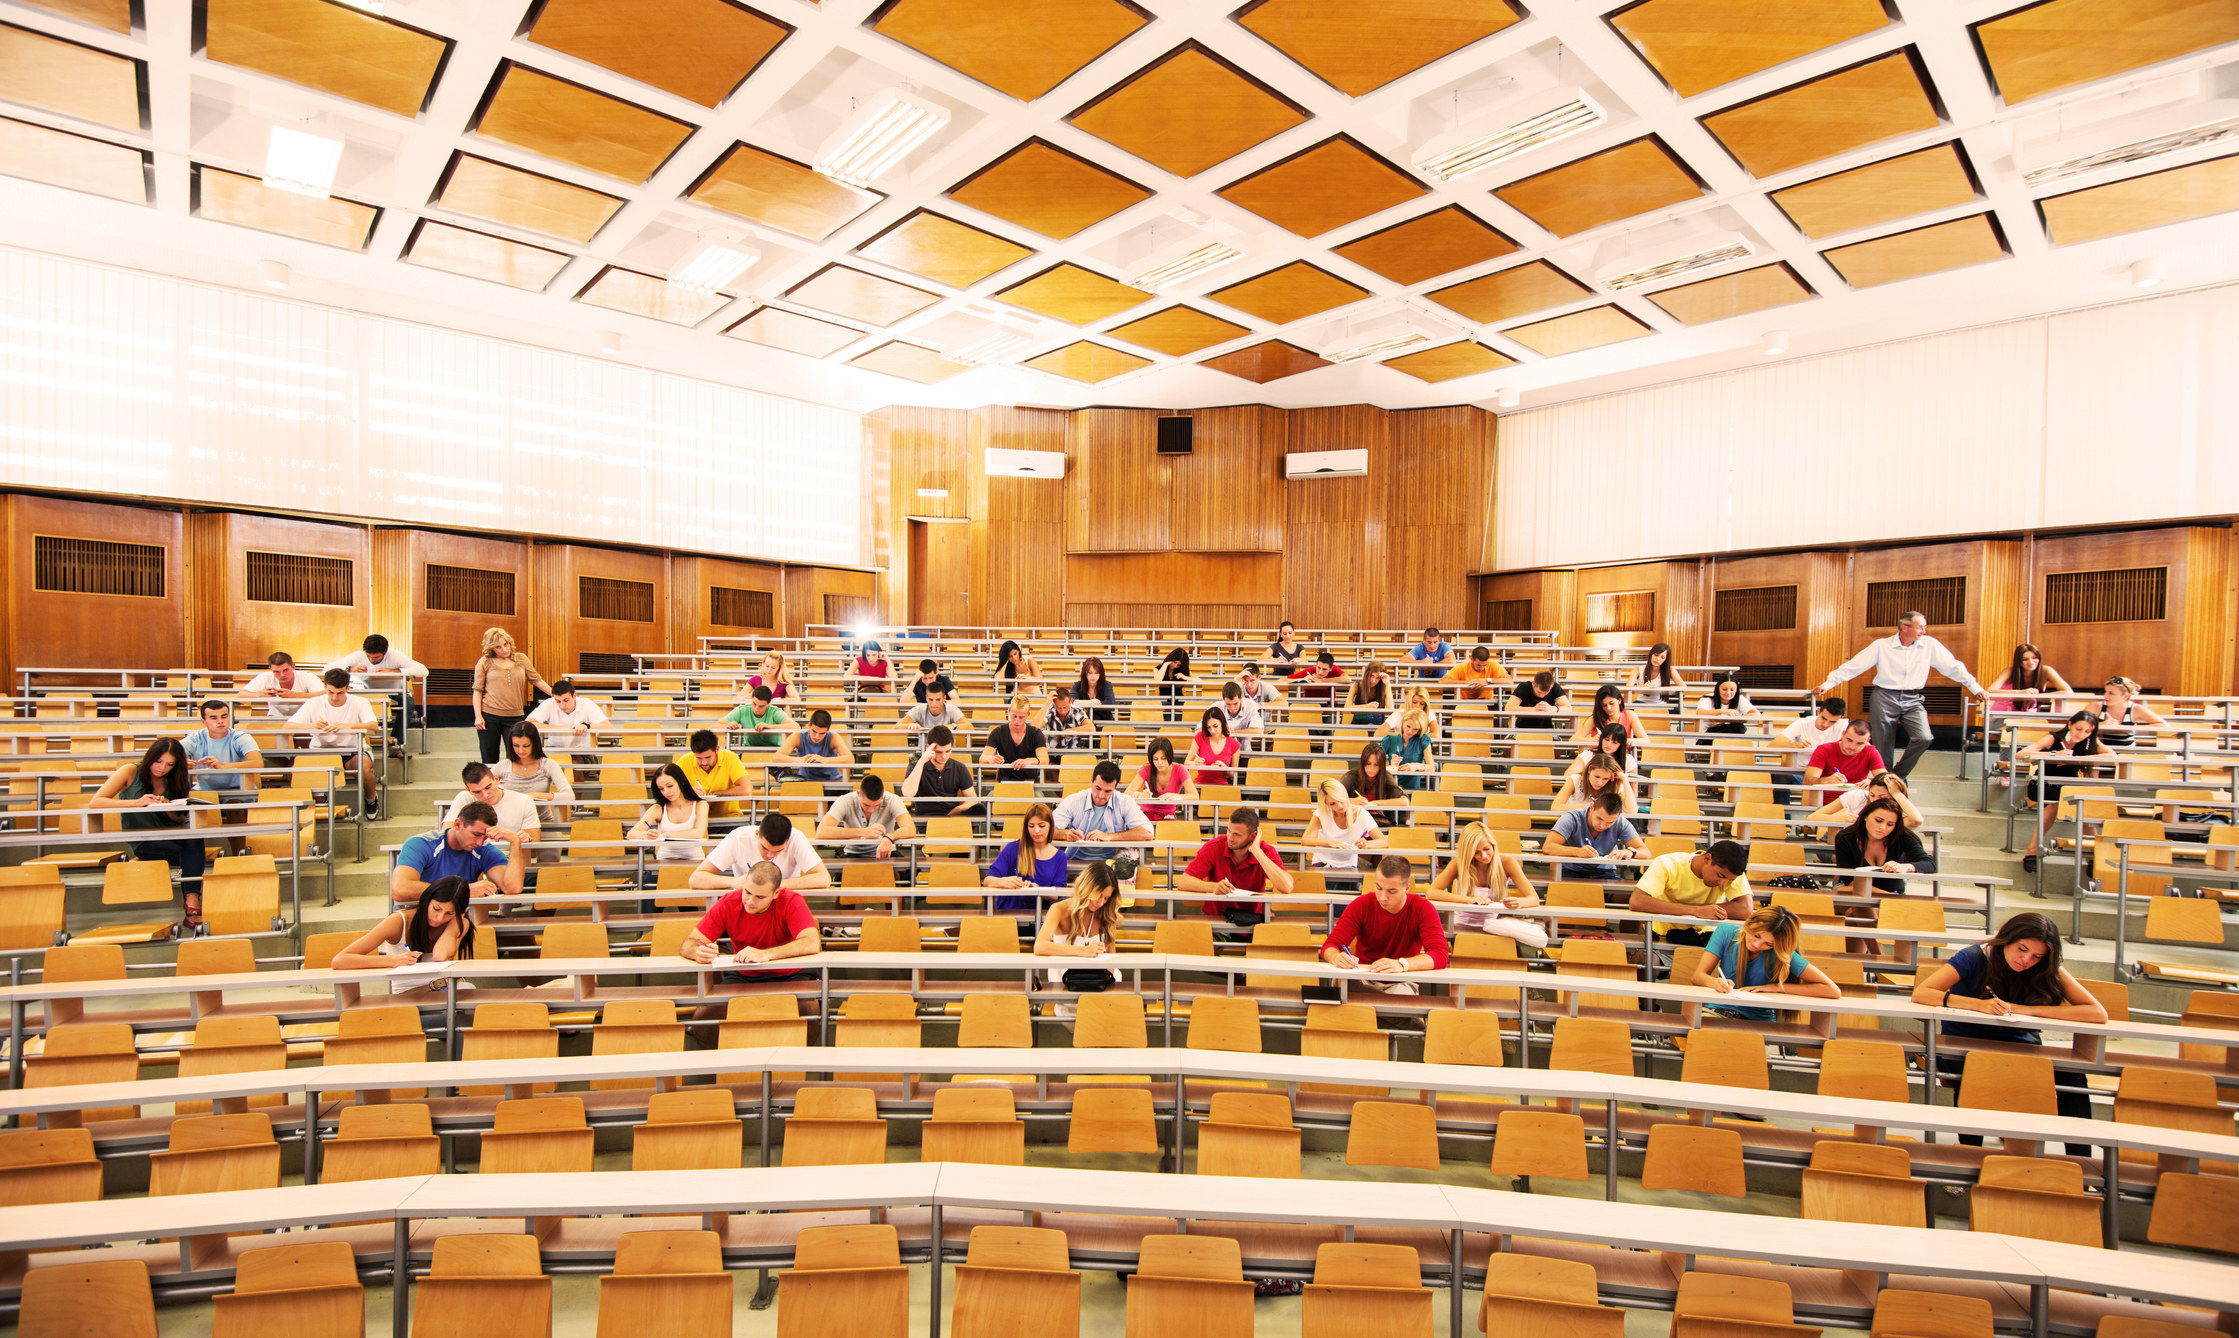 College students in the university amphitheatre sitting and taking an exam